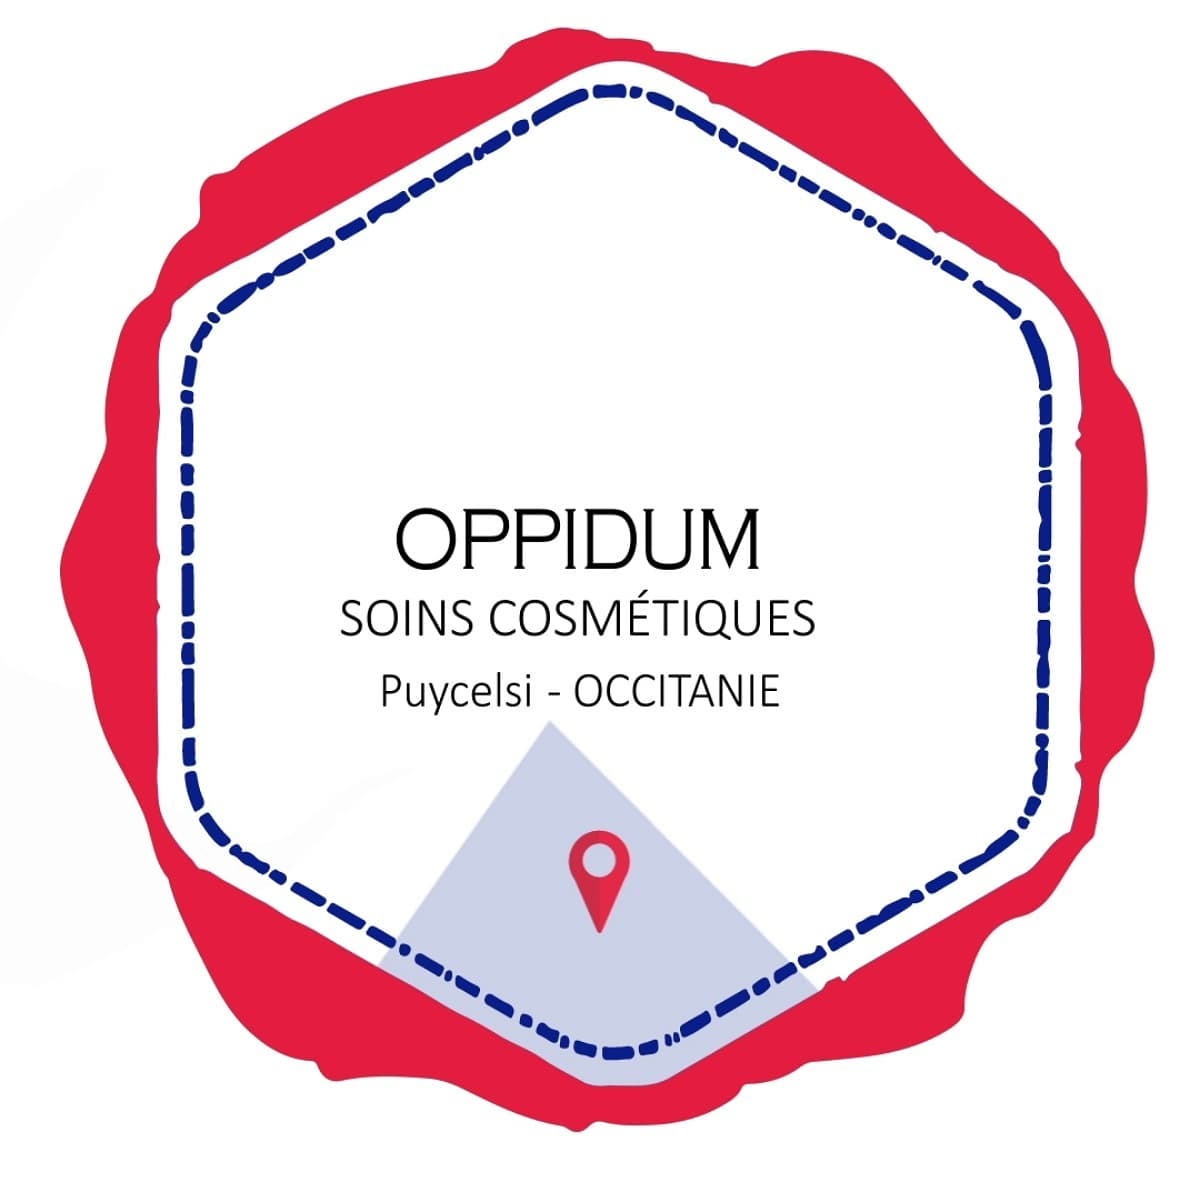 OPPIDUM, soins cosmétiques bio, made in France